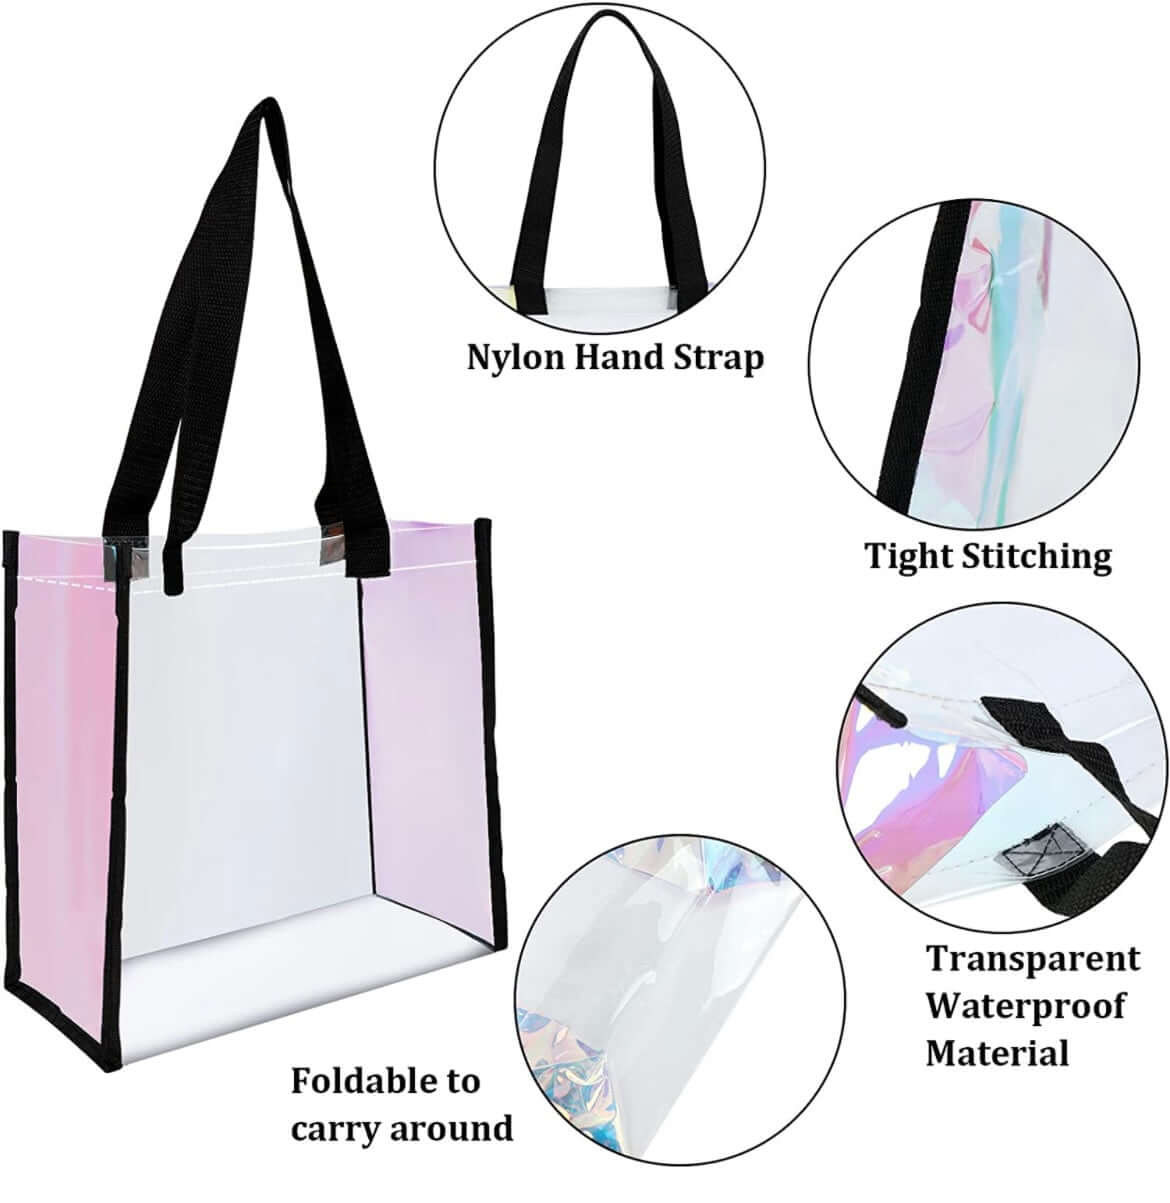 Transparent clear stadium tote bag with black nylon hand straps, tight stitching, and waterproof material for secure everyday carry.